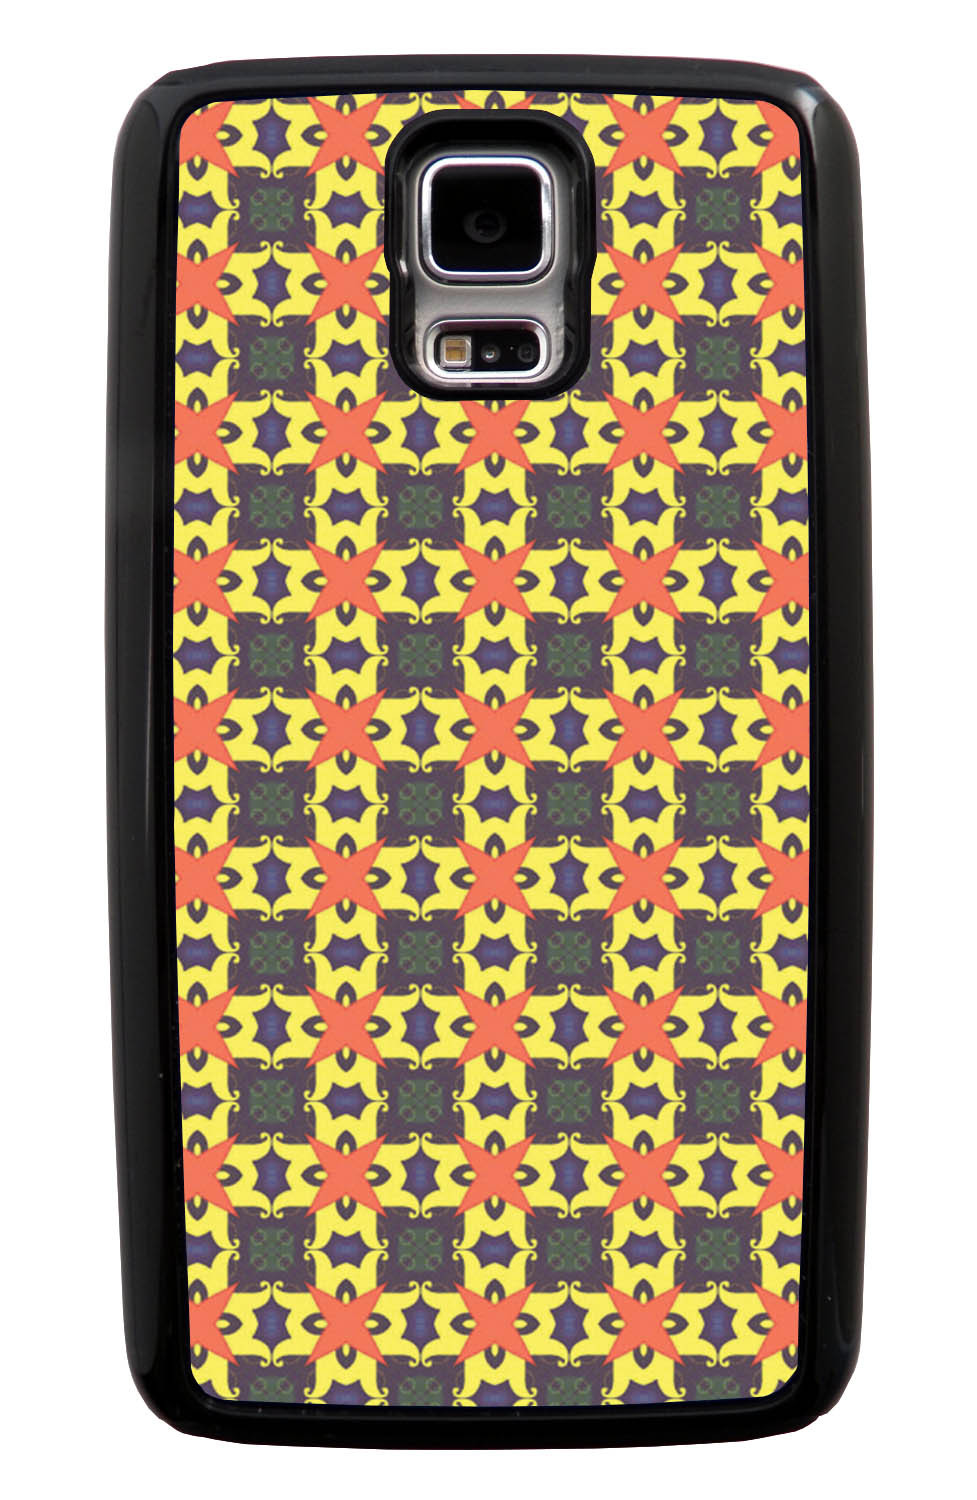 Samsung Galaxy S5 / SV Abstract Case - Halloween Colored - Flower Petal Like - Black Tough Hybrid Case